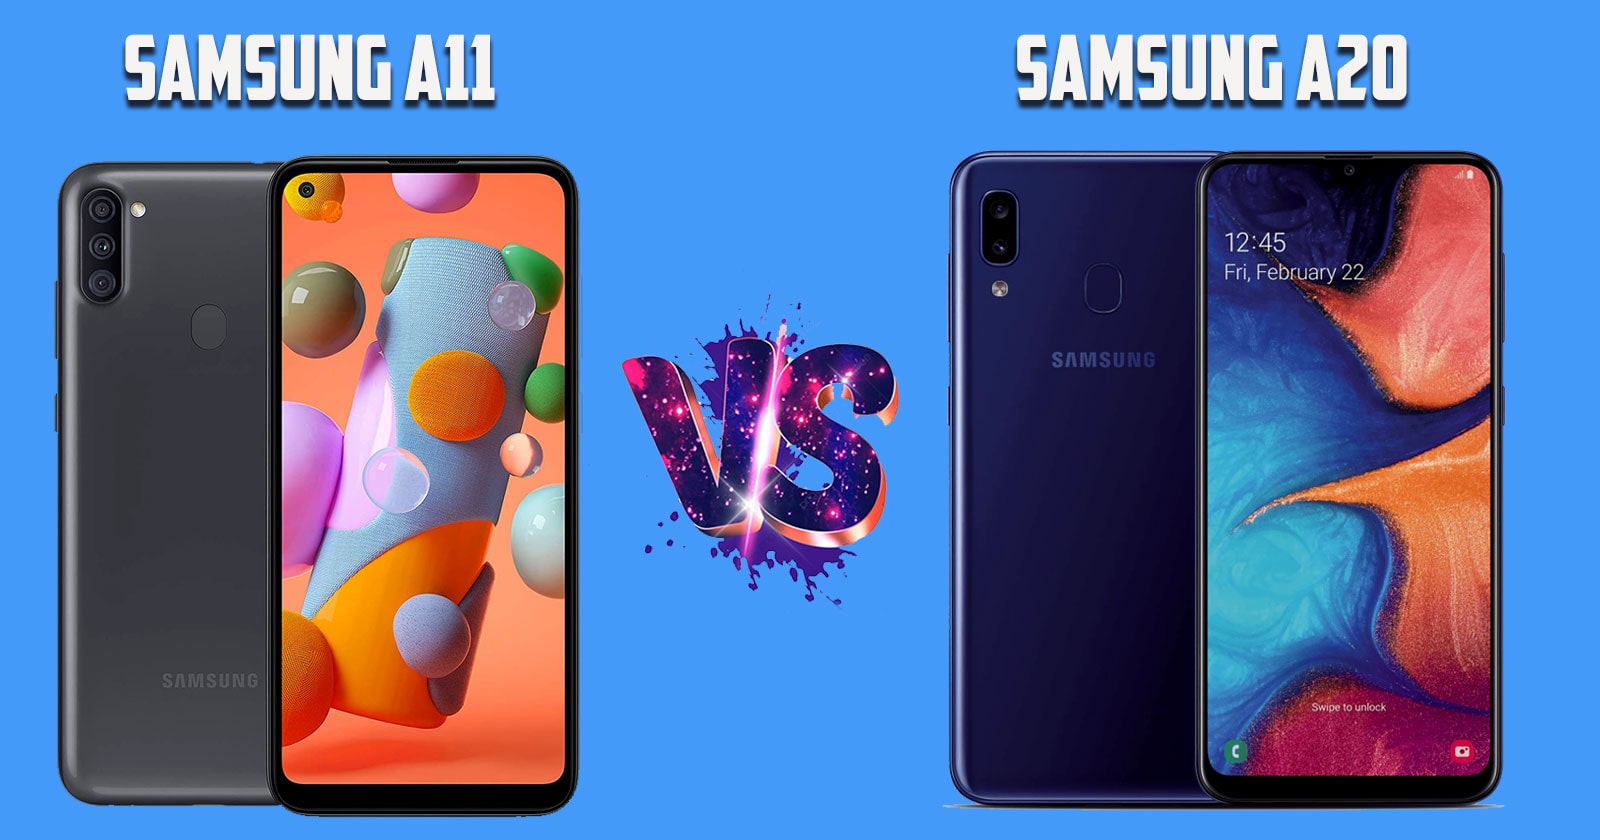 What is the difference between samsung a11 and a20